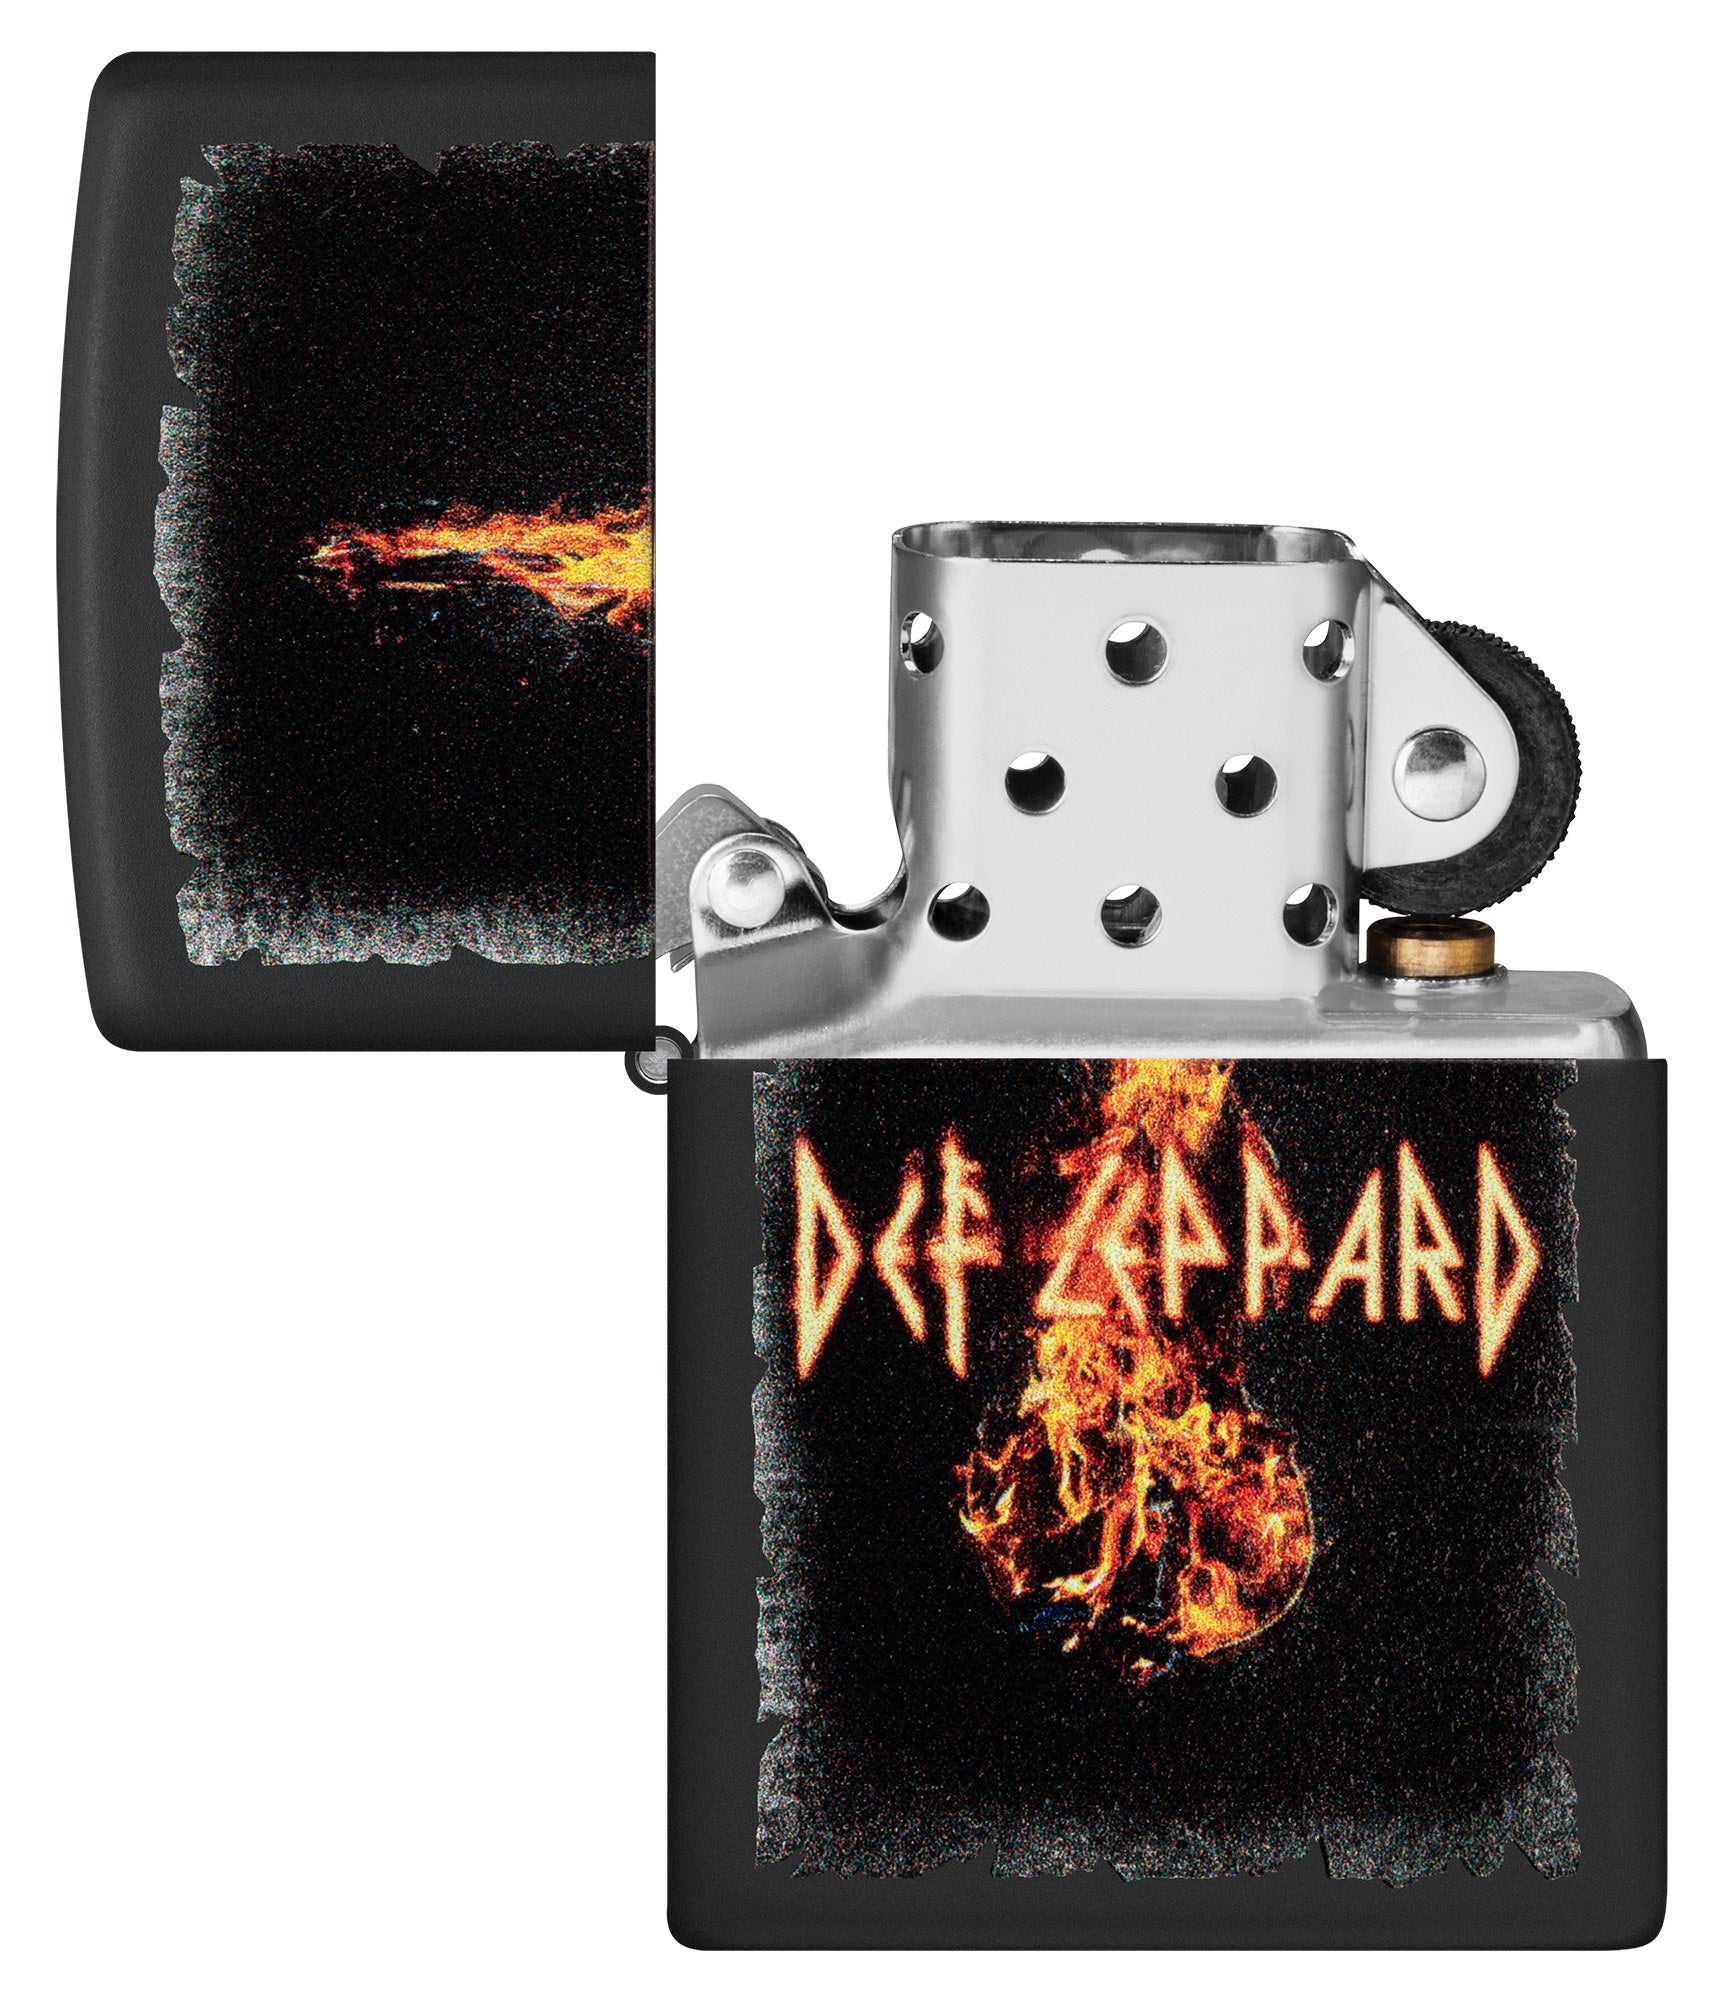 Zippo Def Leppard Burning Violin Black Matte Windproof Lighter with its lid open and unlit.